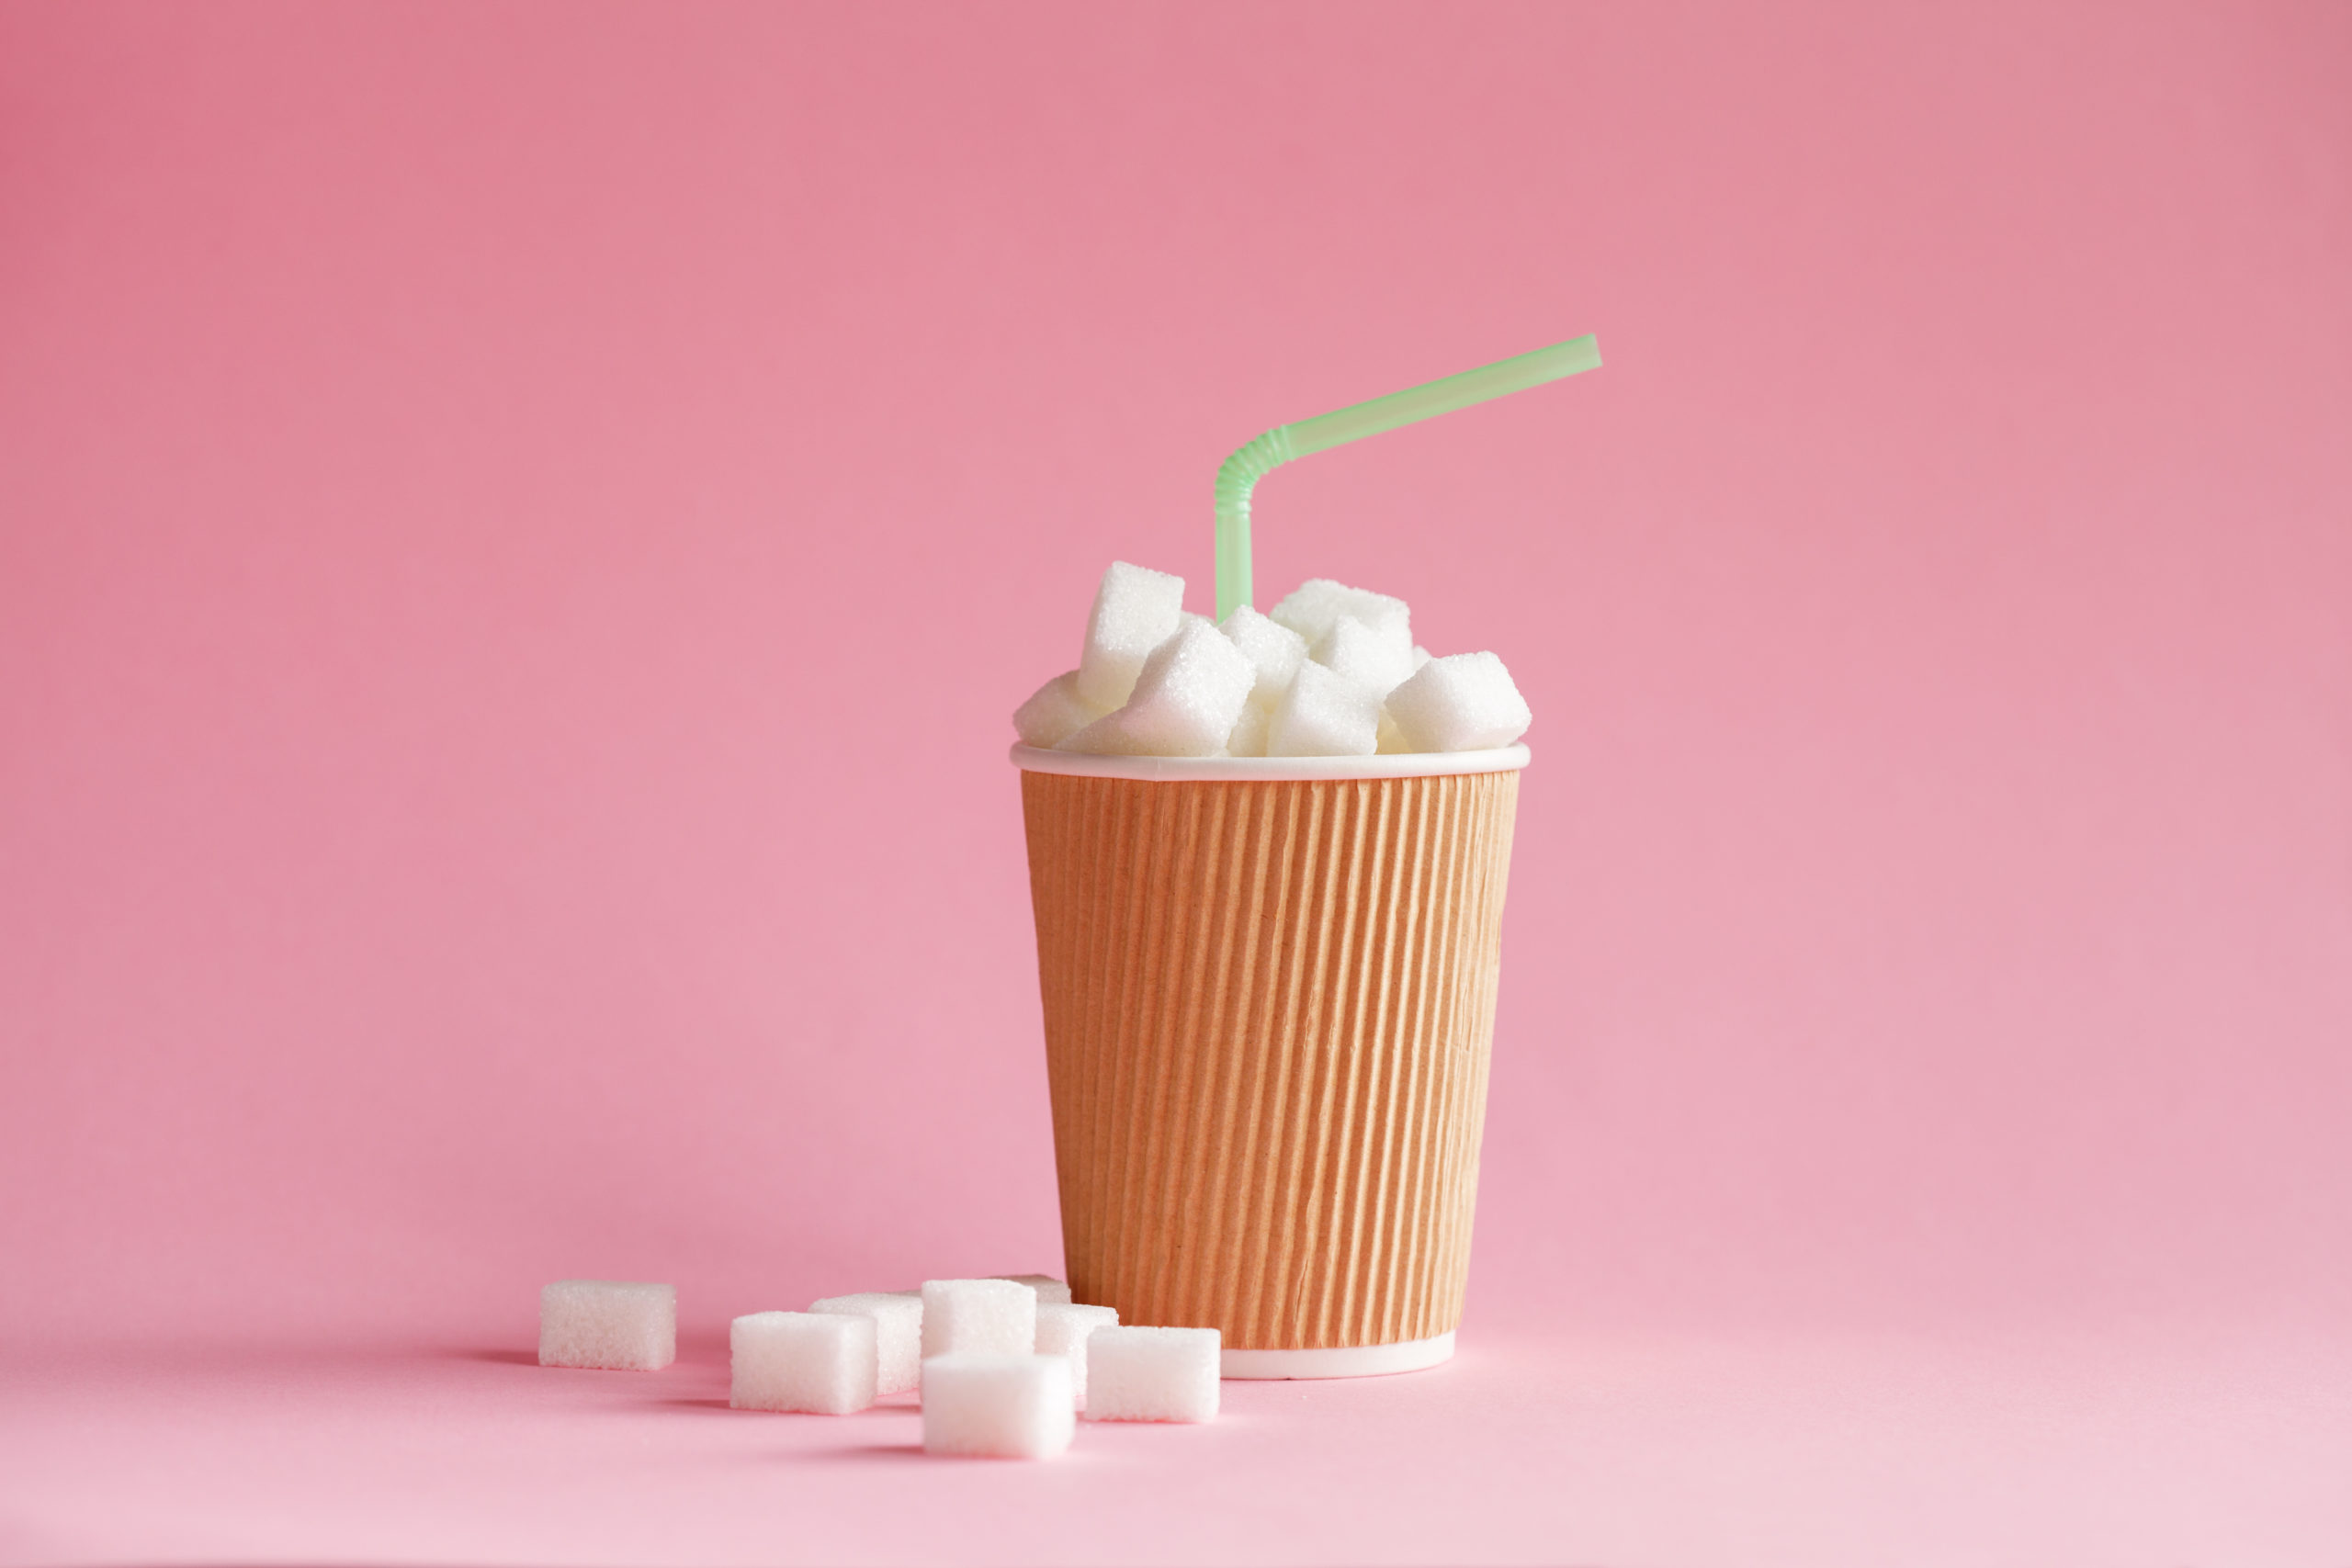 Hidden Sugars in Food & Drinks and How It Affects Your Teeth